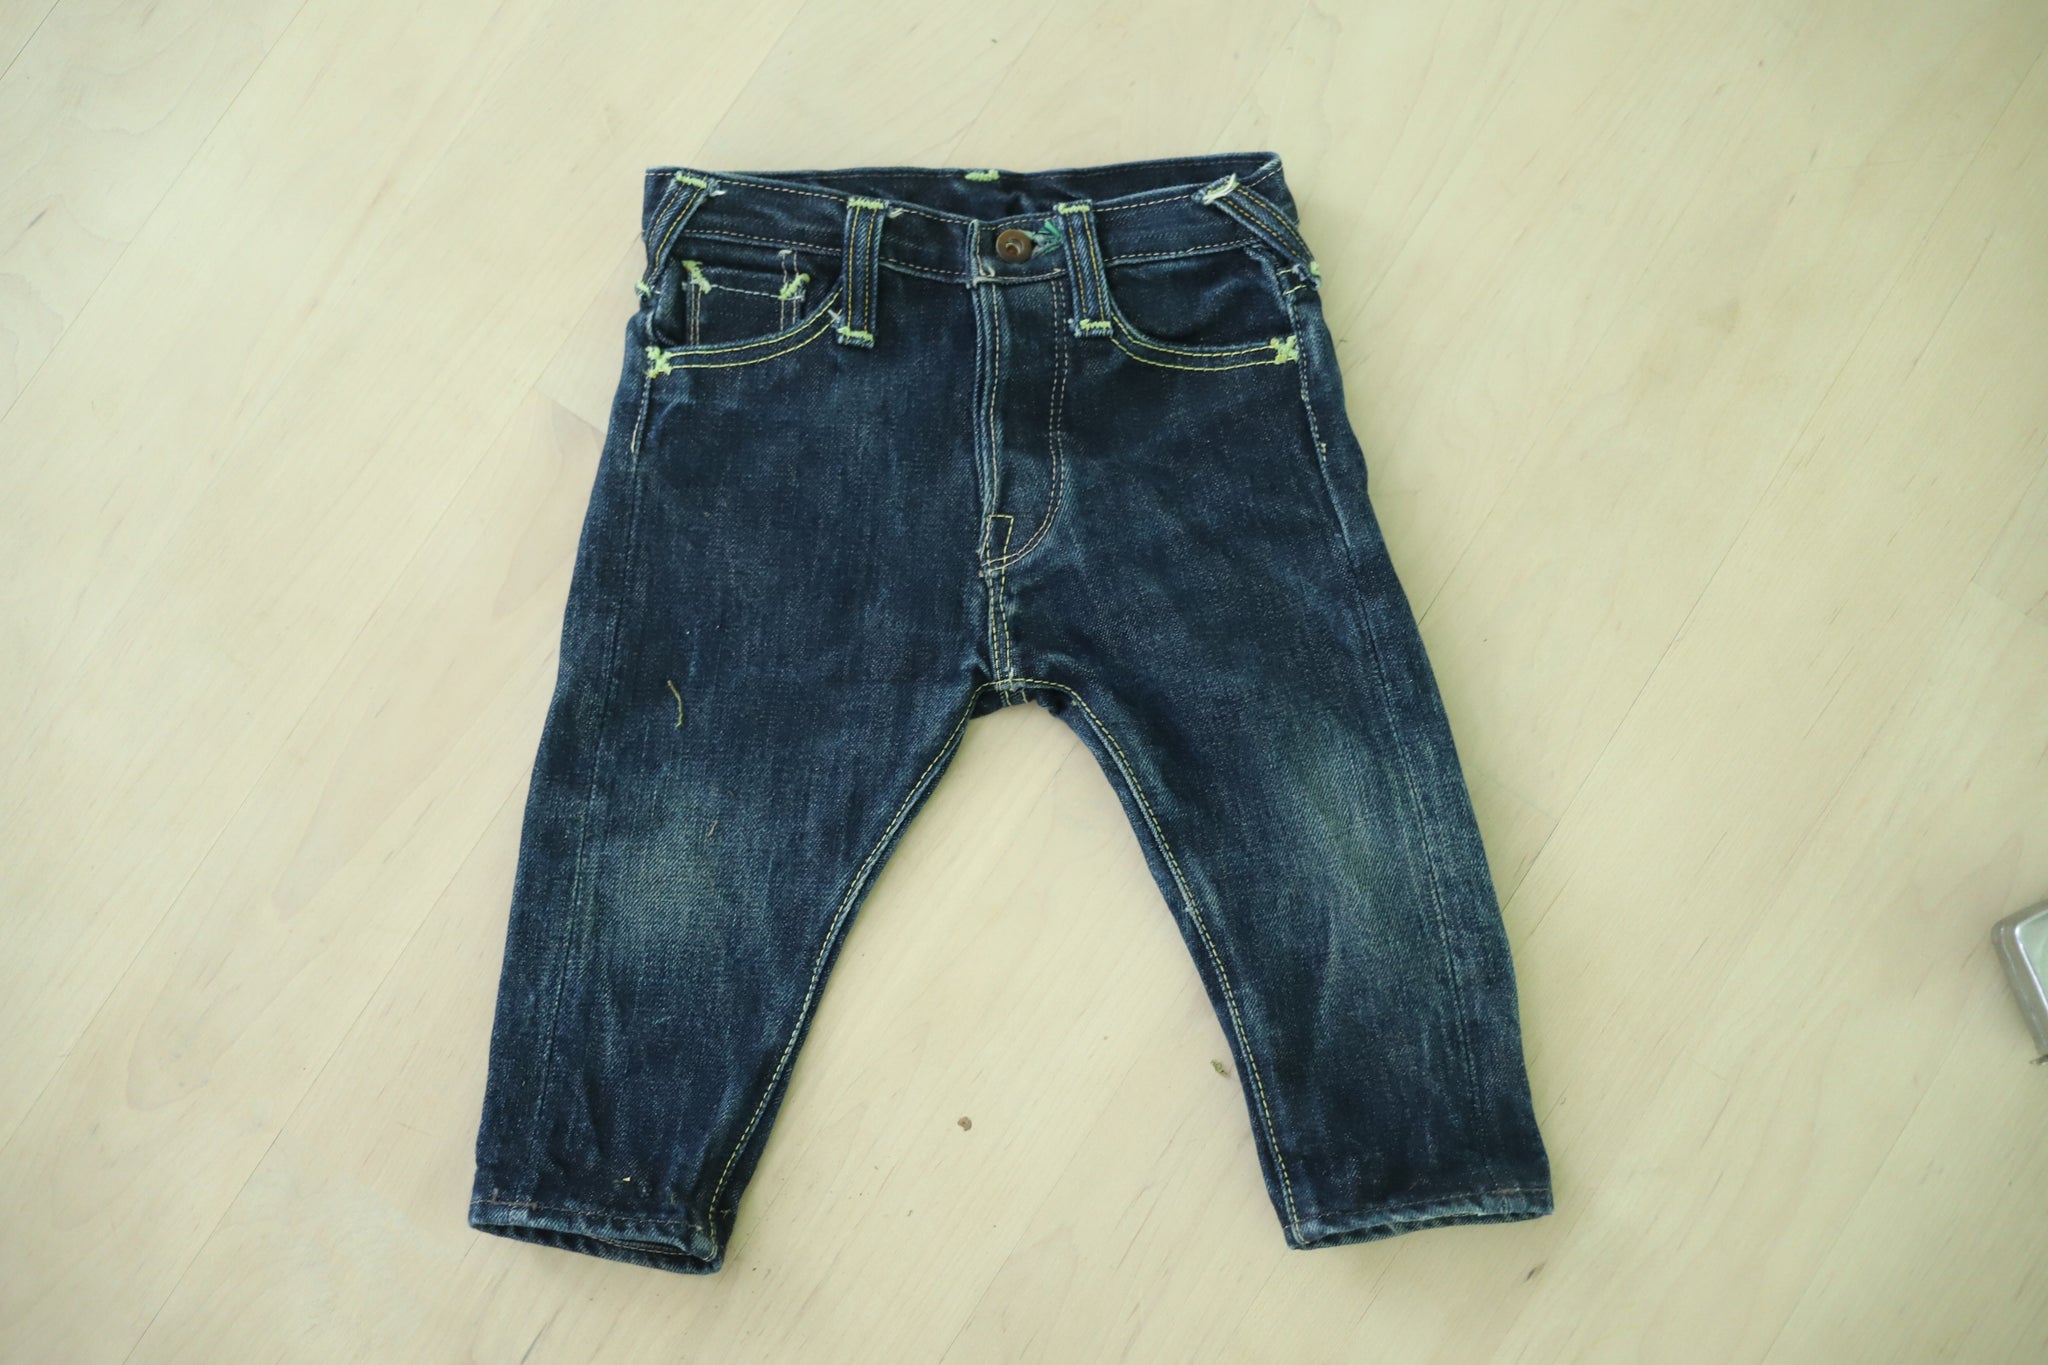 Custom Cut and Sew Jeans Manufacturers and Contractors - Zega Apparel